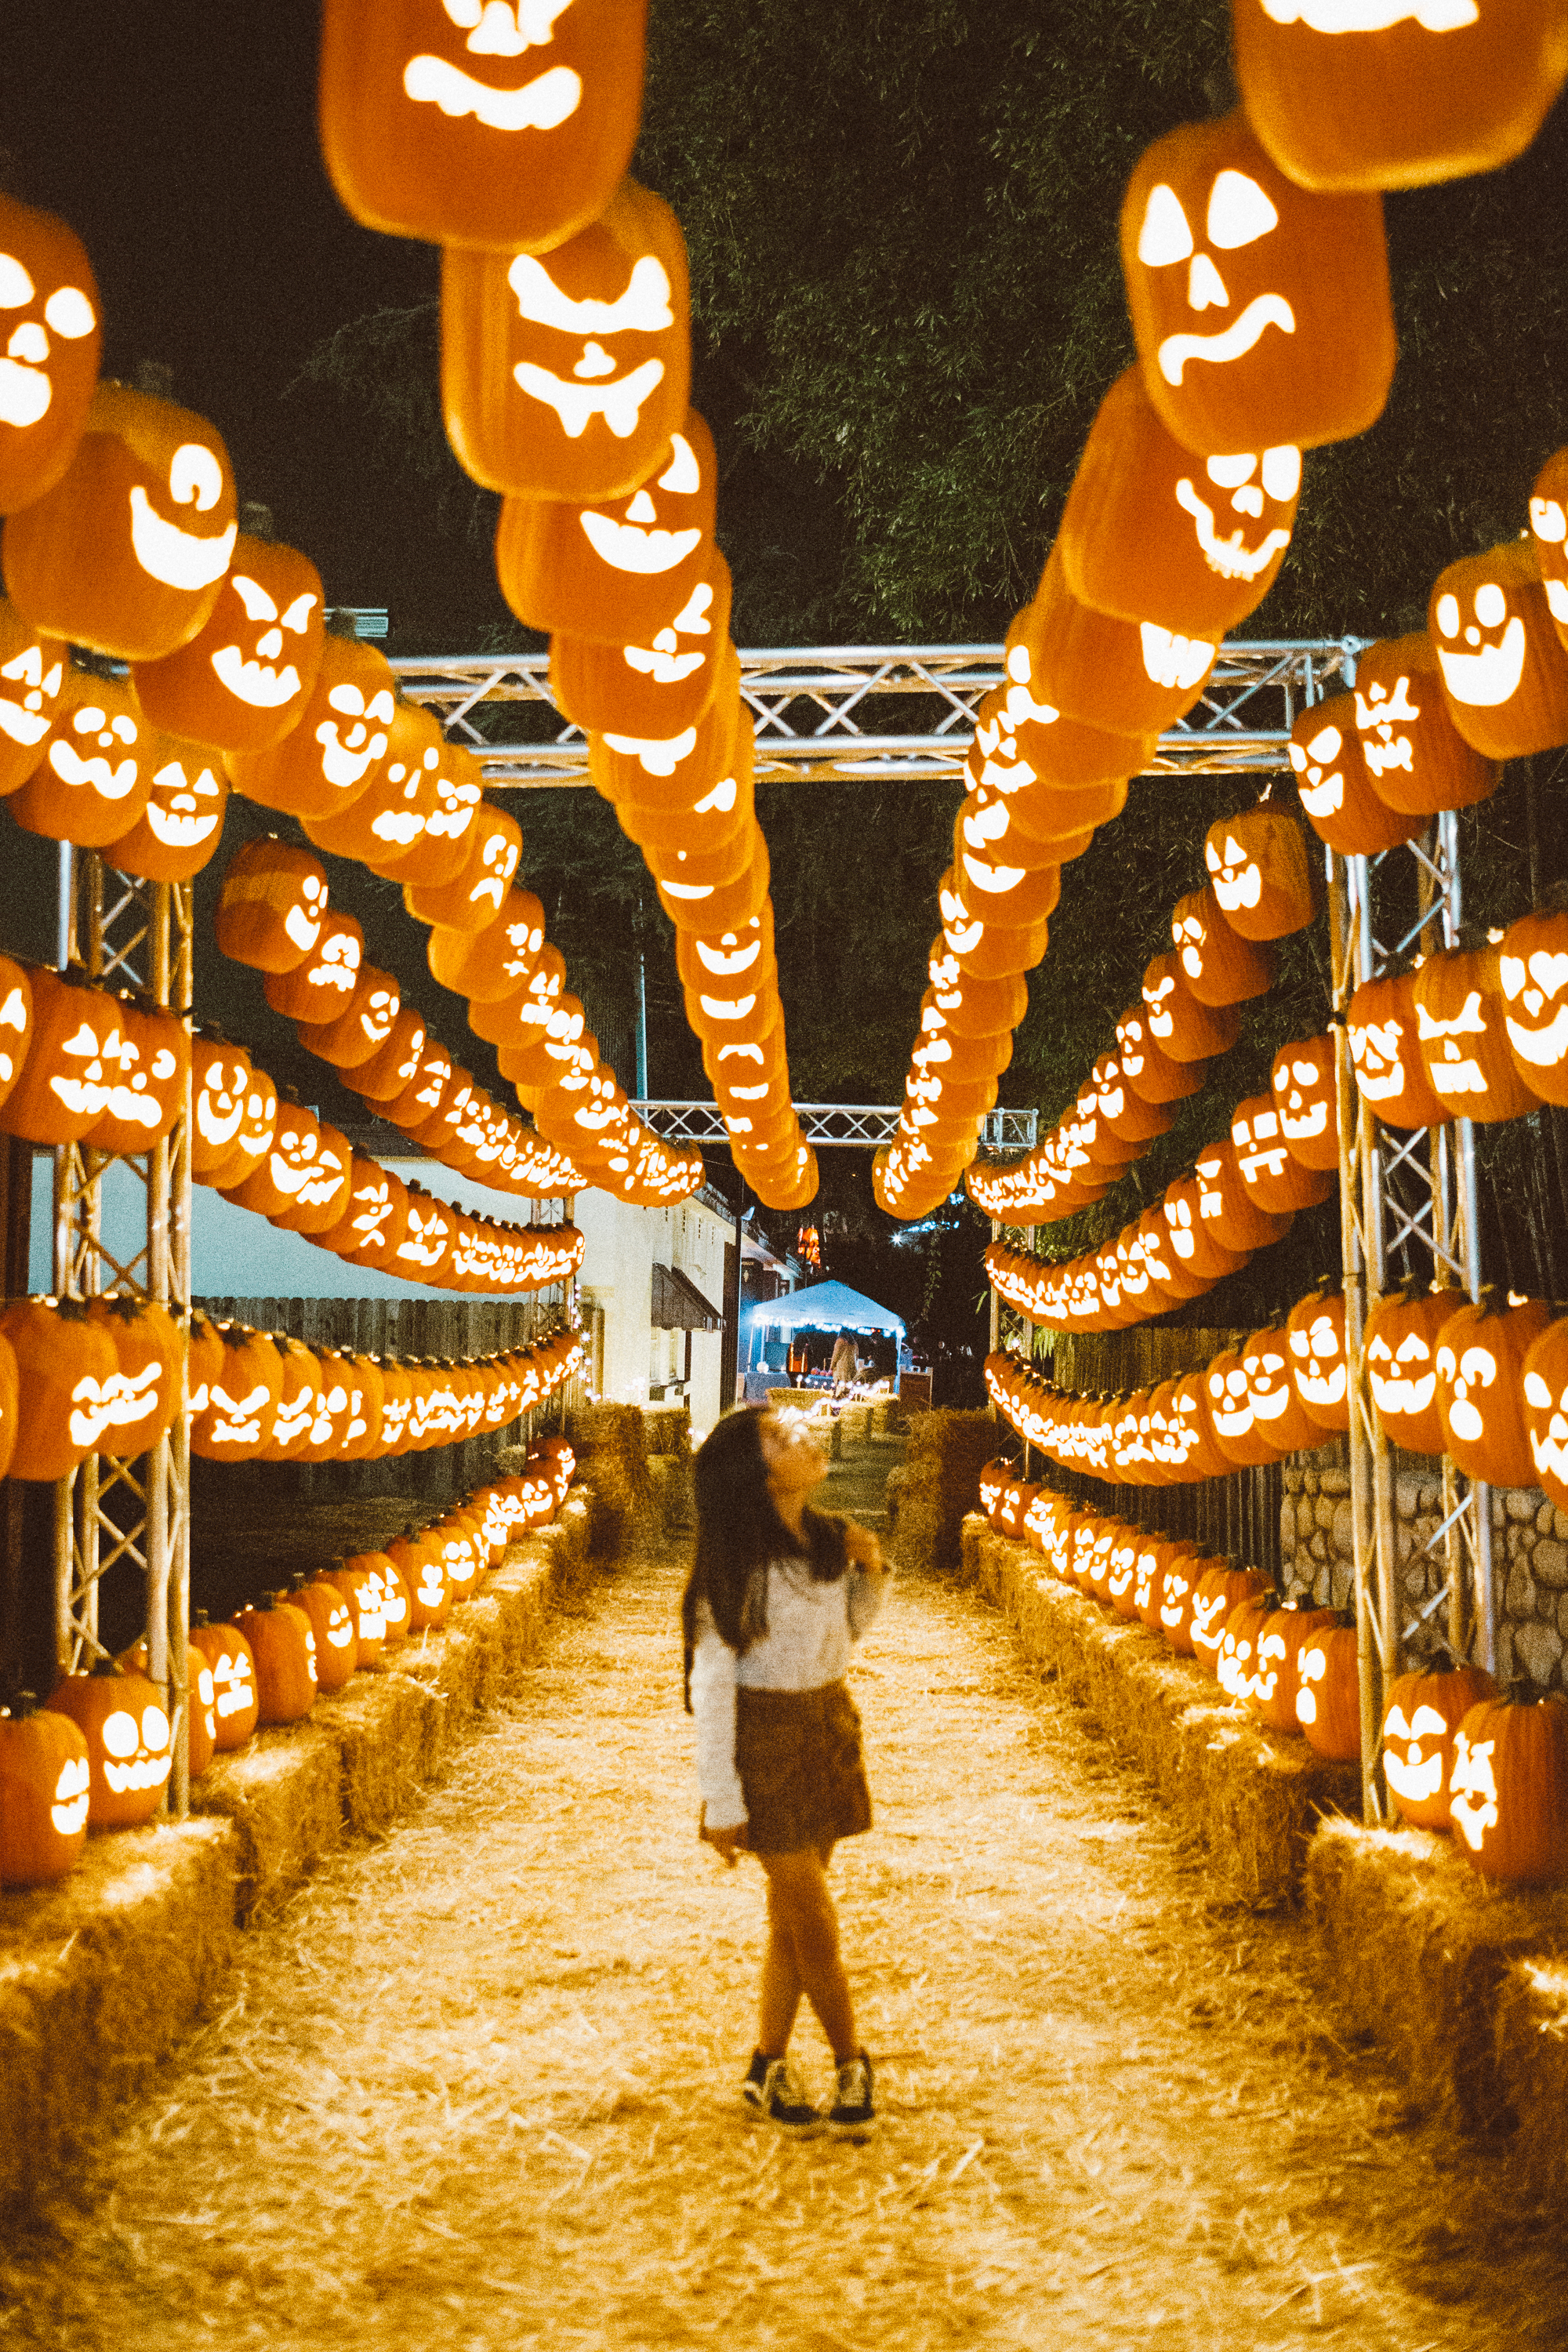 The Most Instagrammable Pumpkin Nights